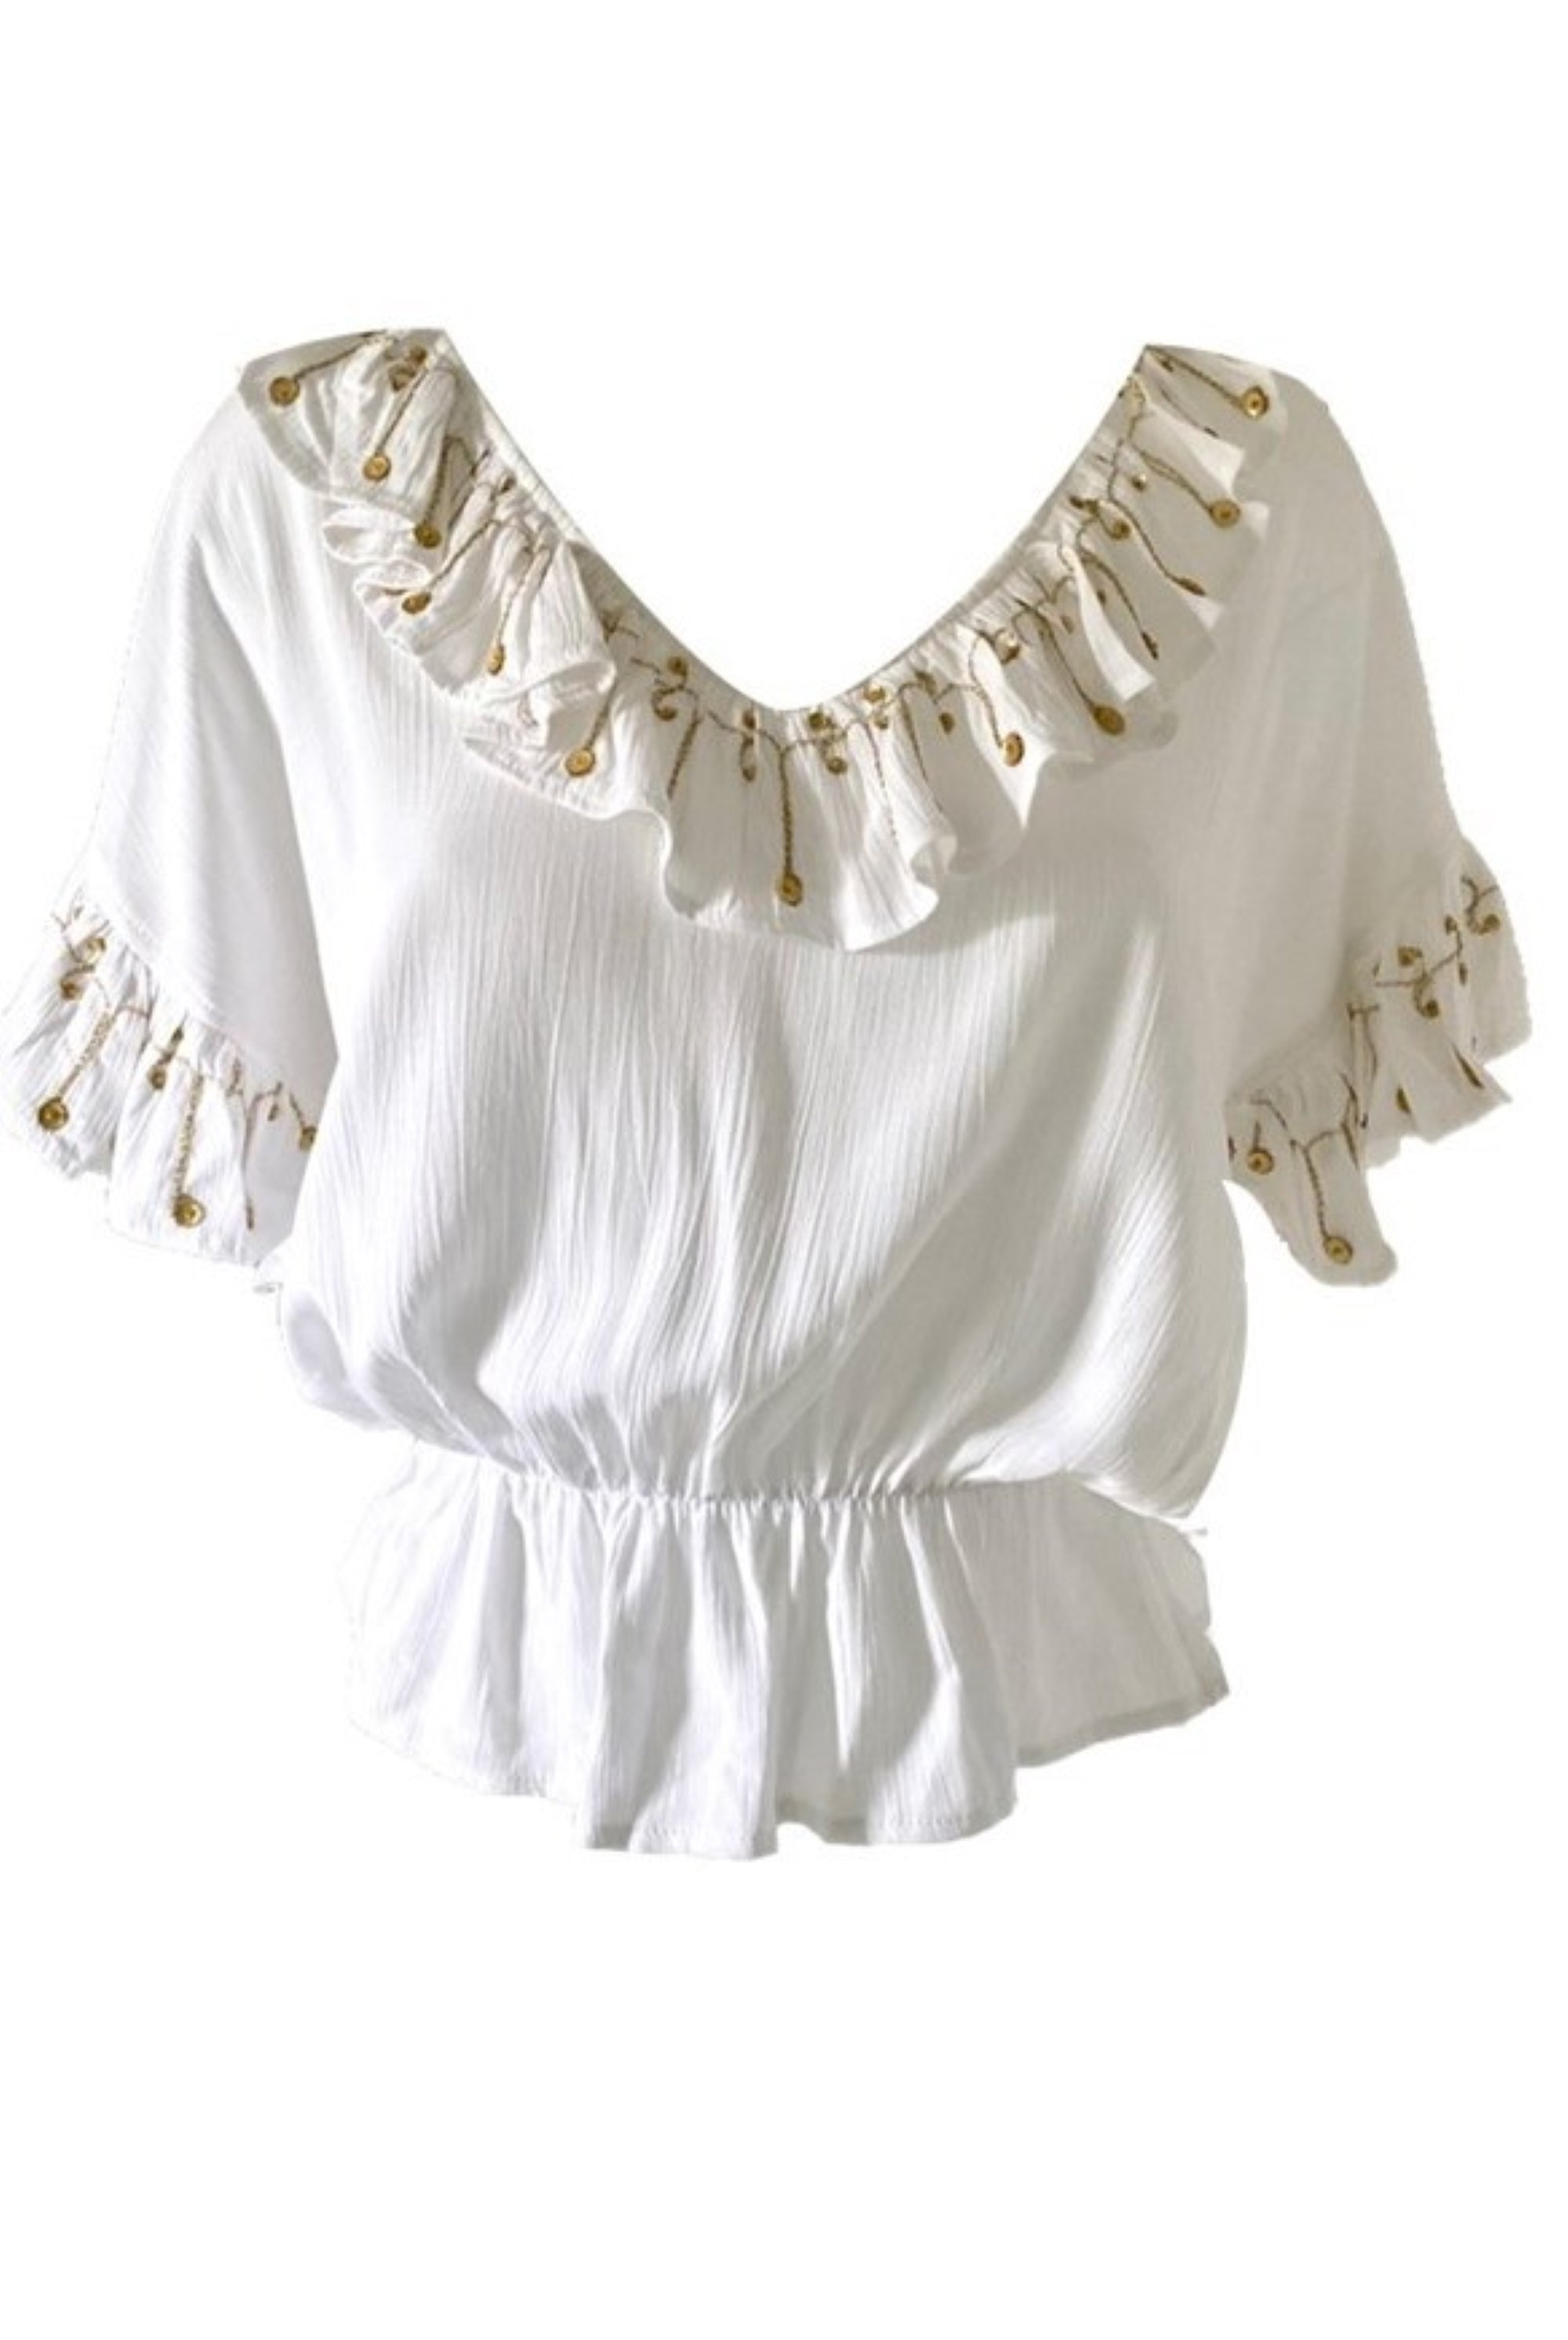 white cotton ruffled holiday top by lindsey brown resort wear 